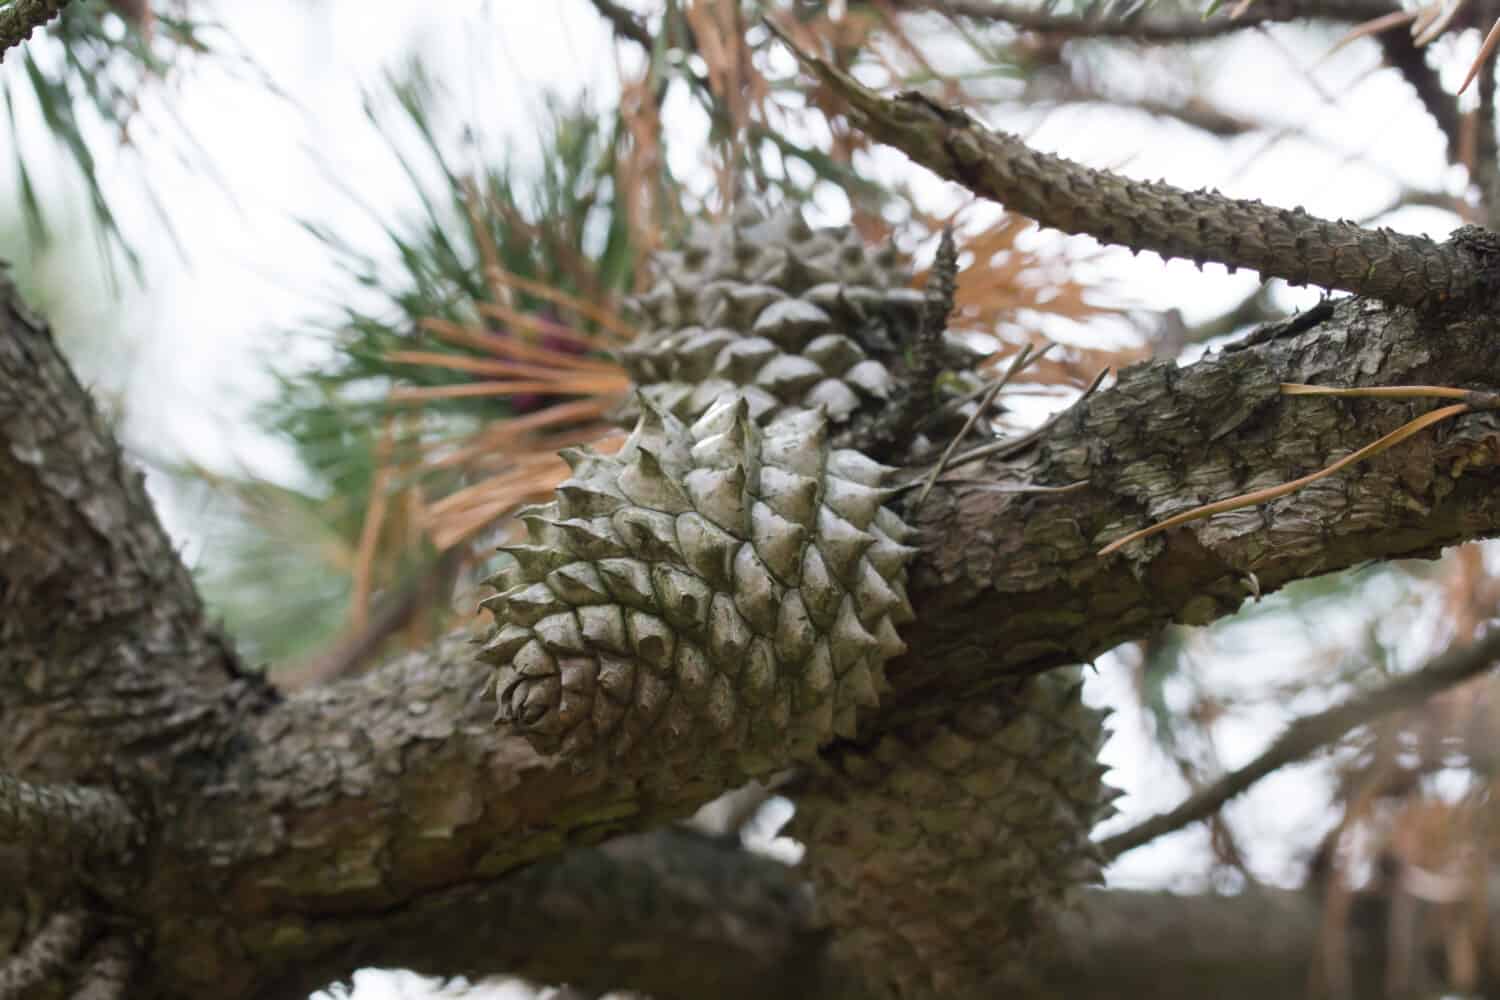 Close ups on the cones of the table mountain pine (Pinus pungens) also called hickory pine, native to the Appalachian Mountains in the United States of America